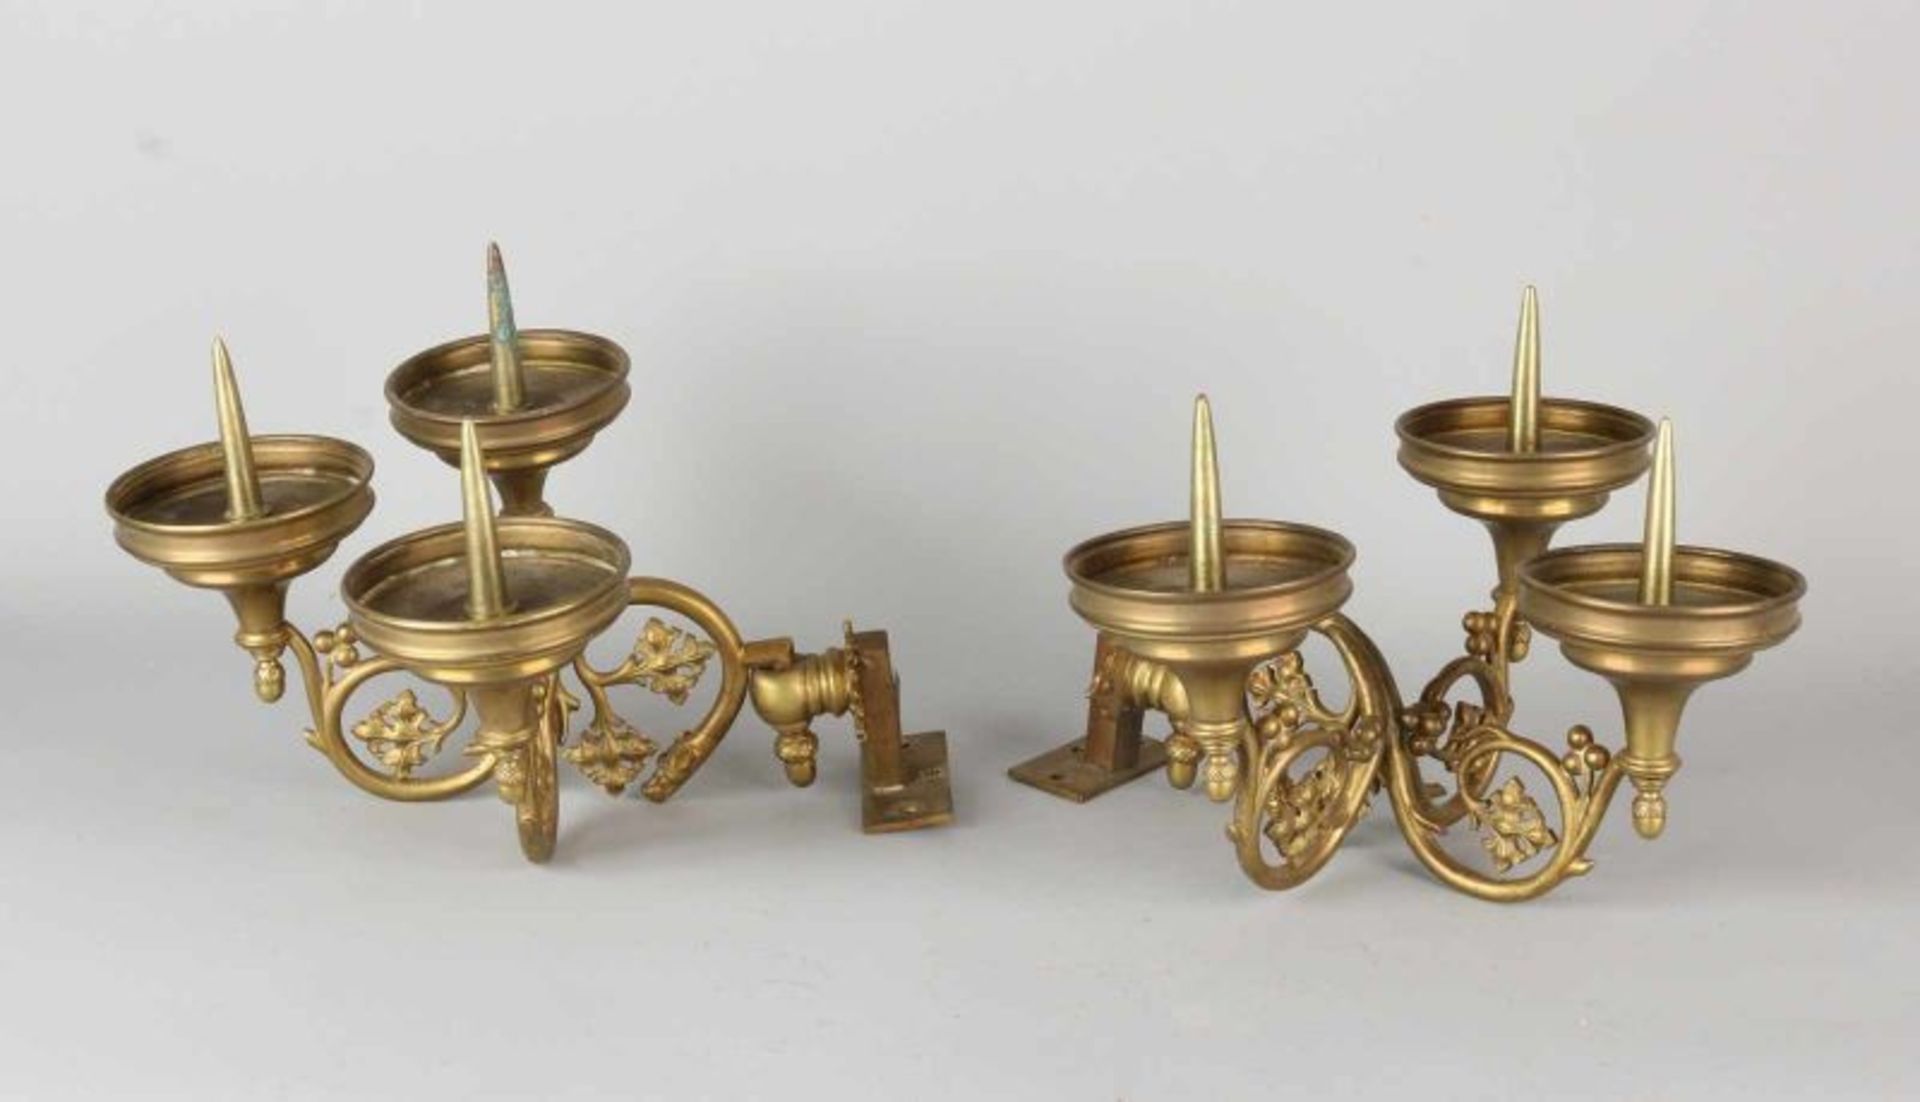 Two 19th century bronze wall candlesticks with tendrils. Neo Renaissance. Dimensions: 19 x 27 x 28